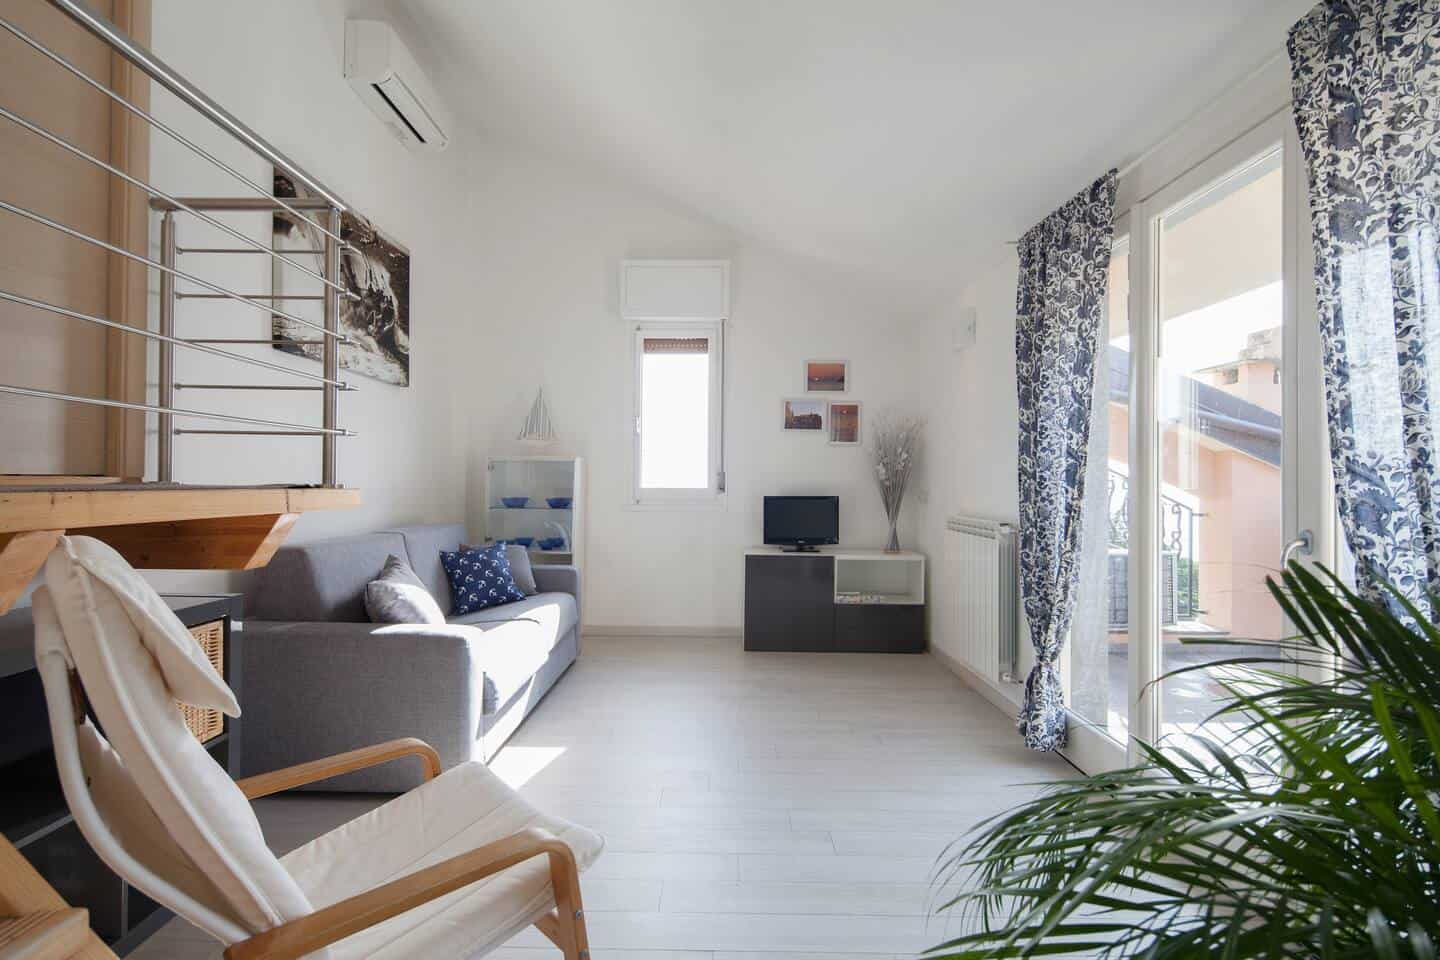 Image of Airbnb rental in Cinque Terre, Italy